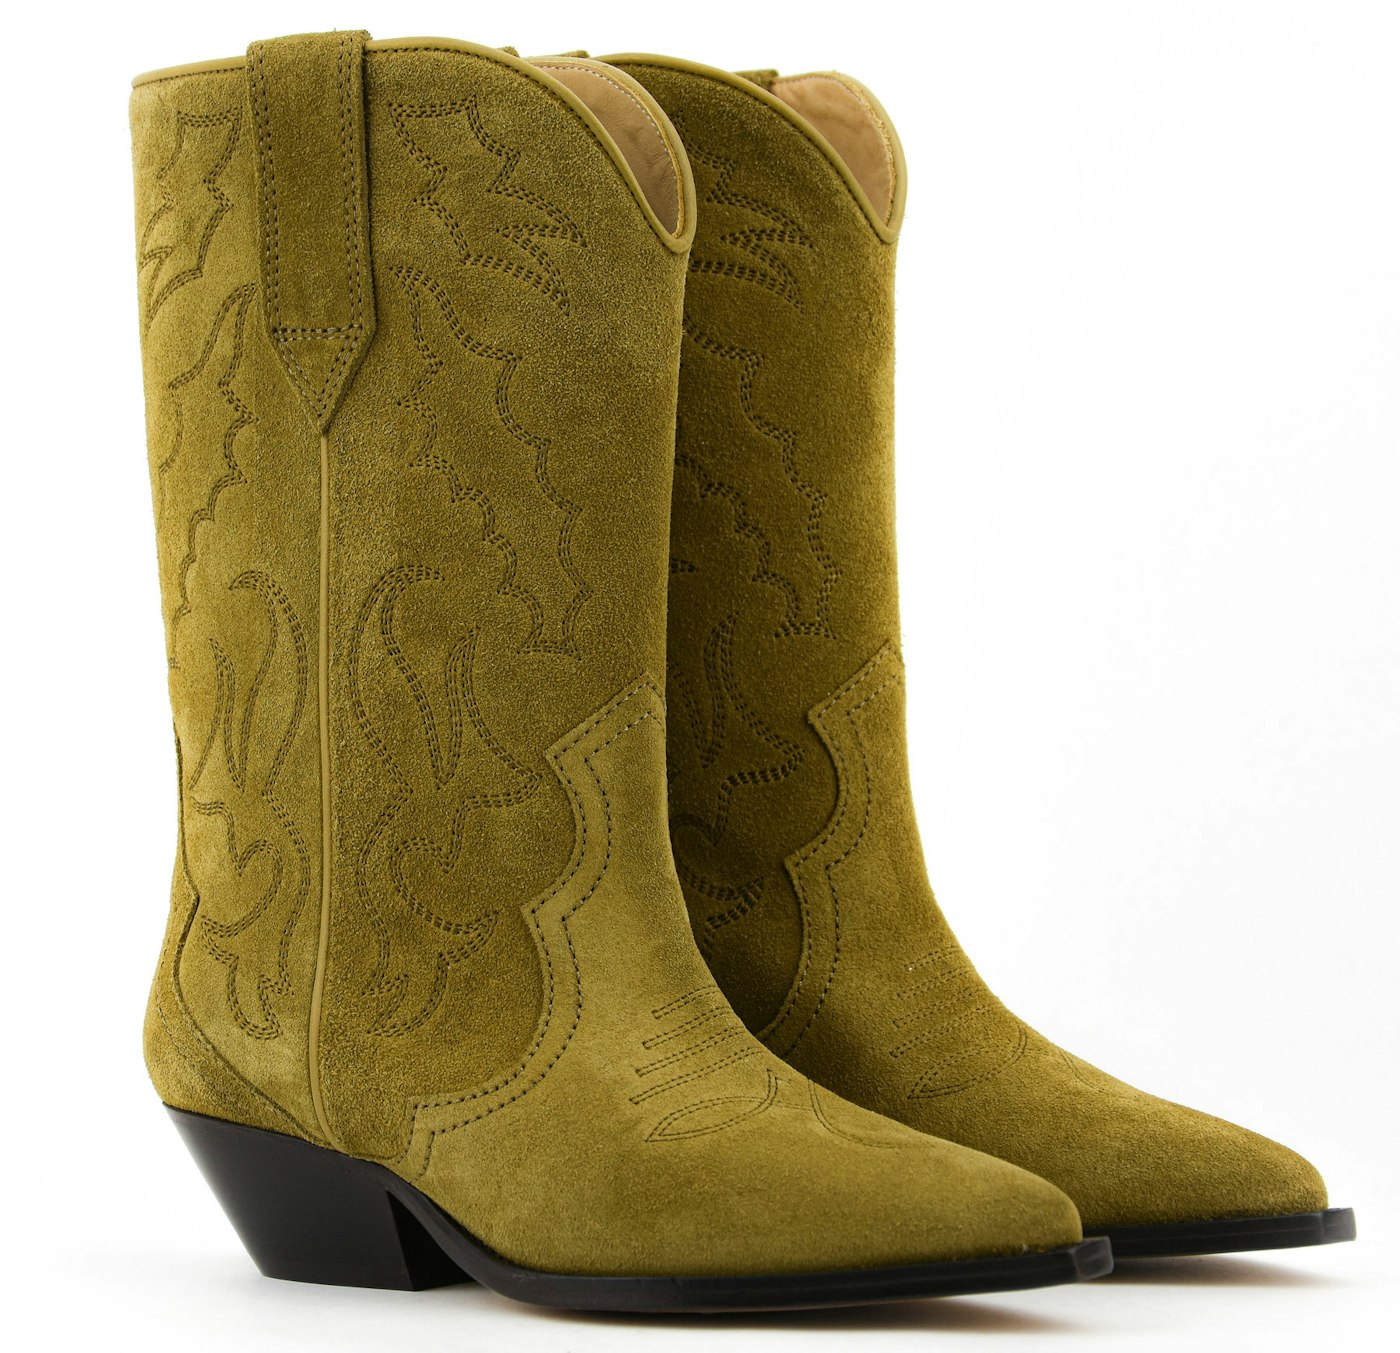 ISABEL MARANT DUERTO BOOT TAUPE